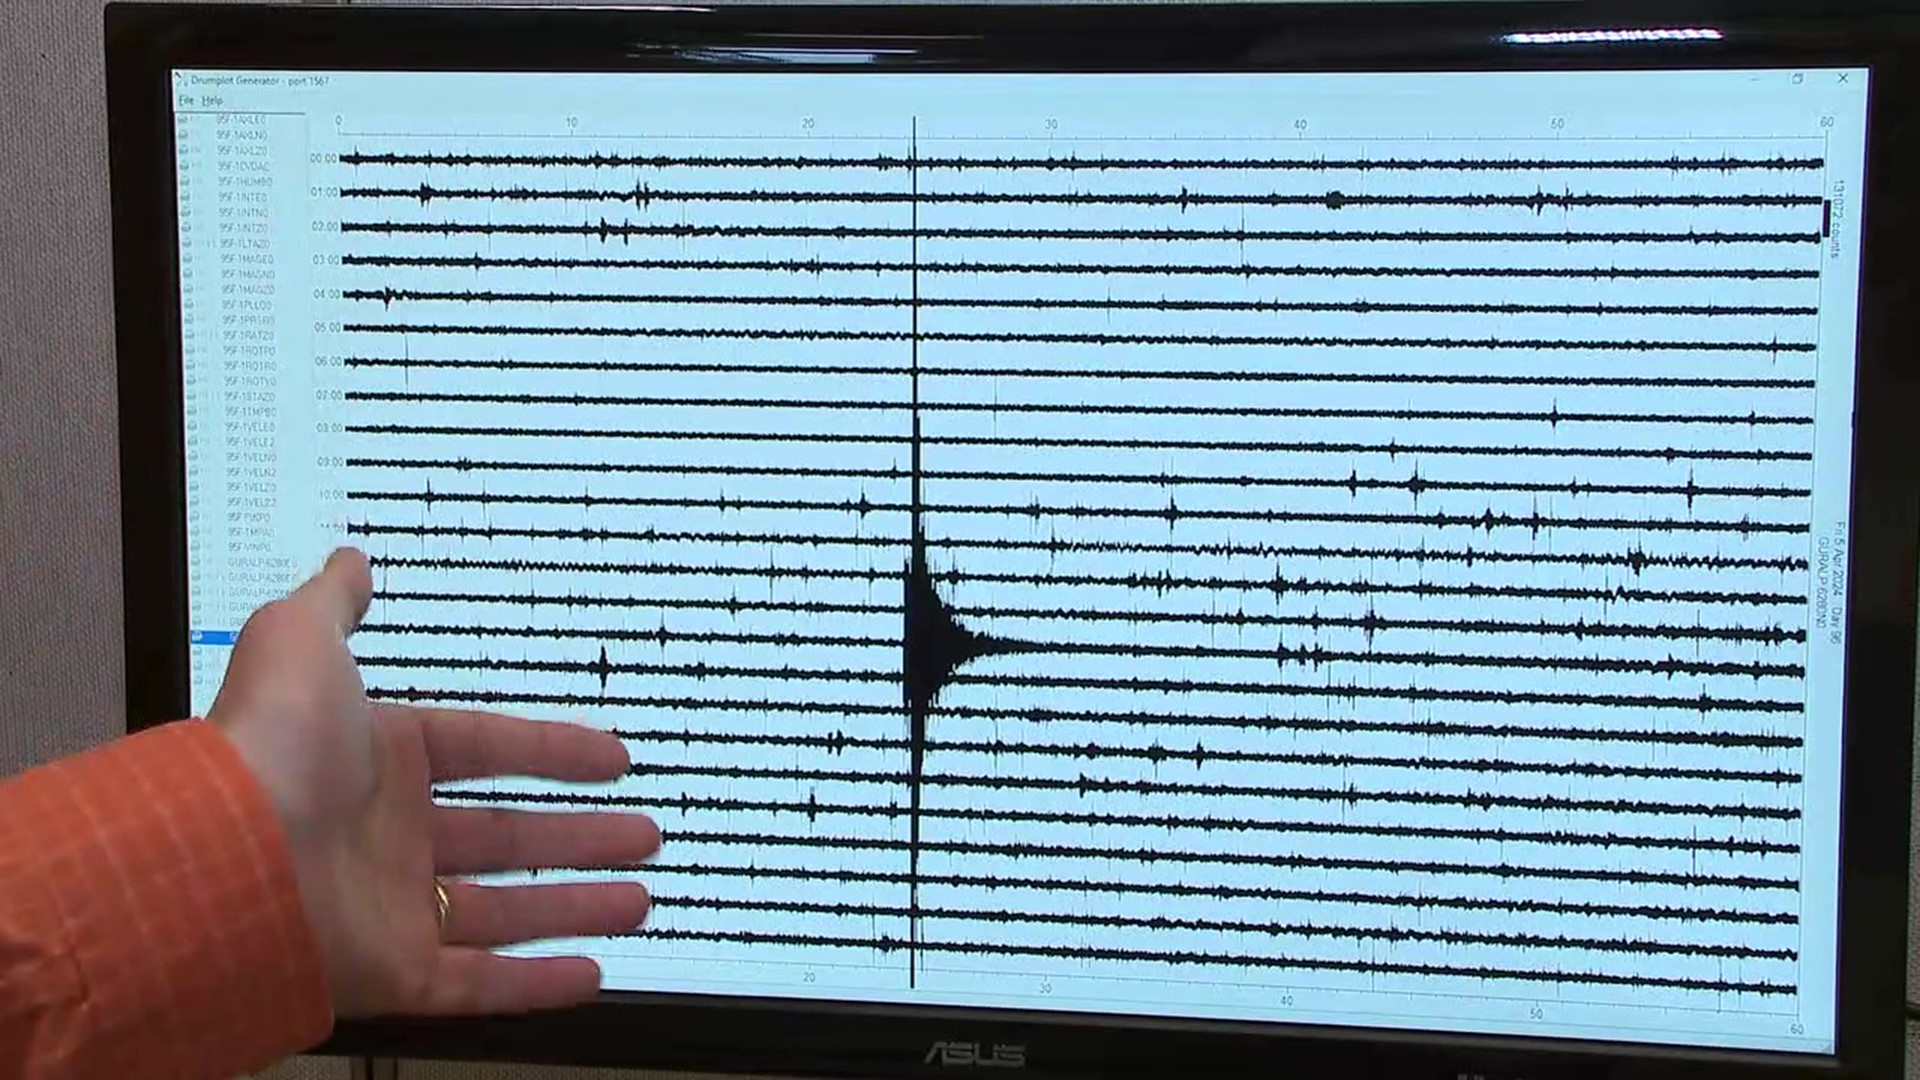 Newswatch 16's Mackenzie Aucker spoke with geology professors at Bucknell University about the New Jersey earthquake felt throughout our area.